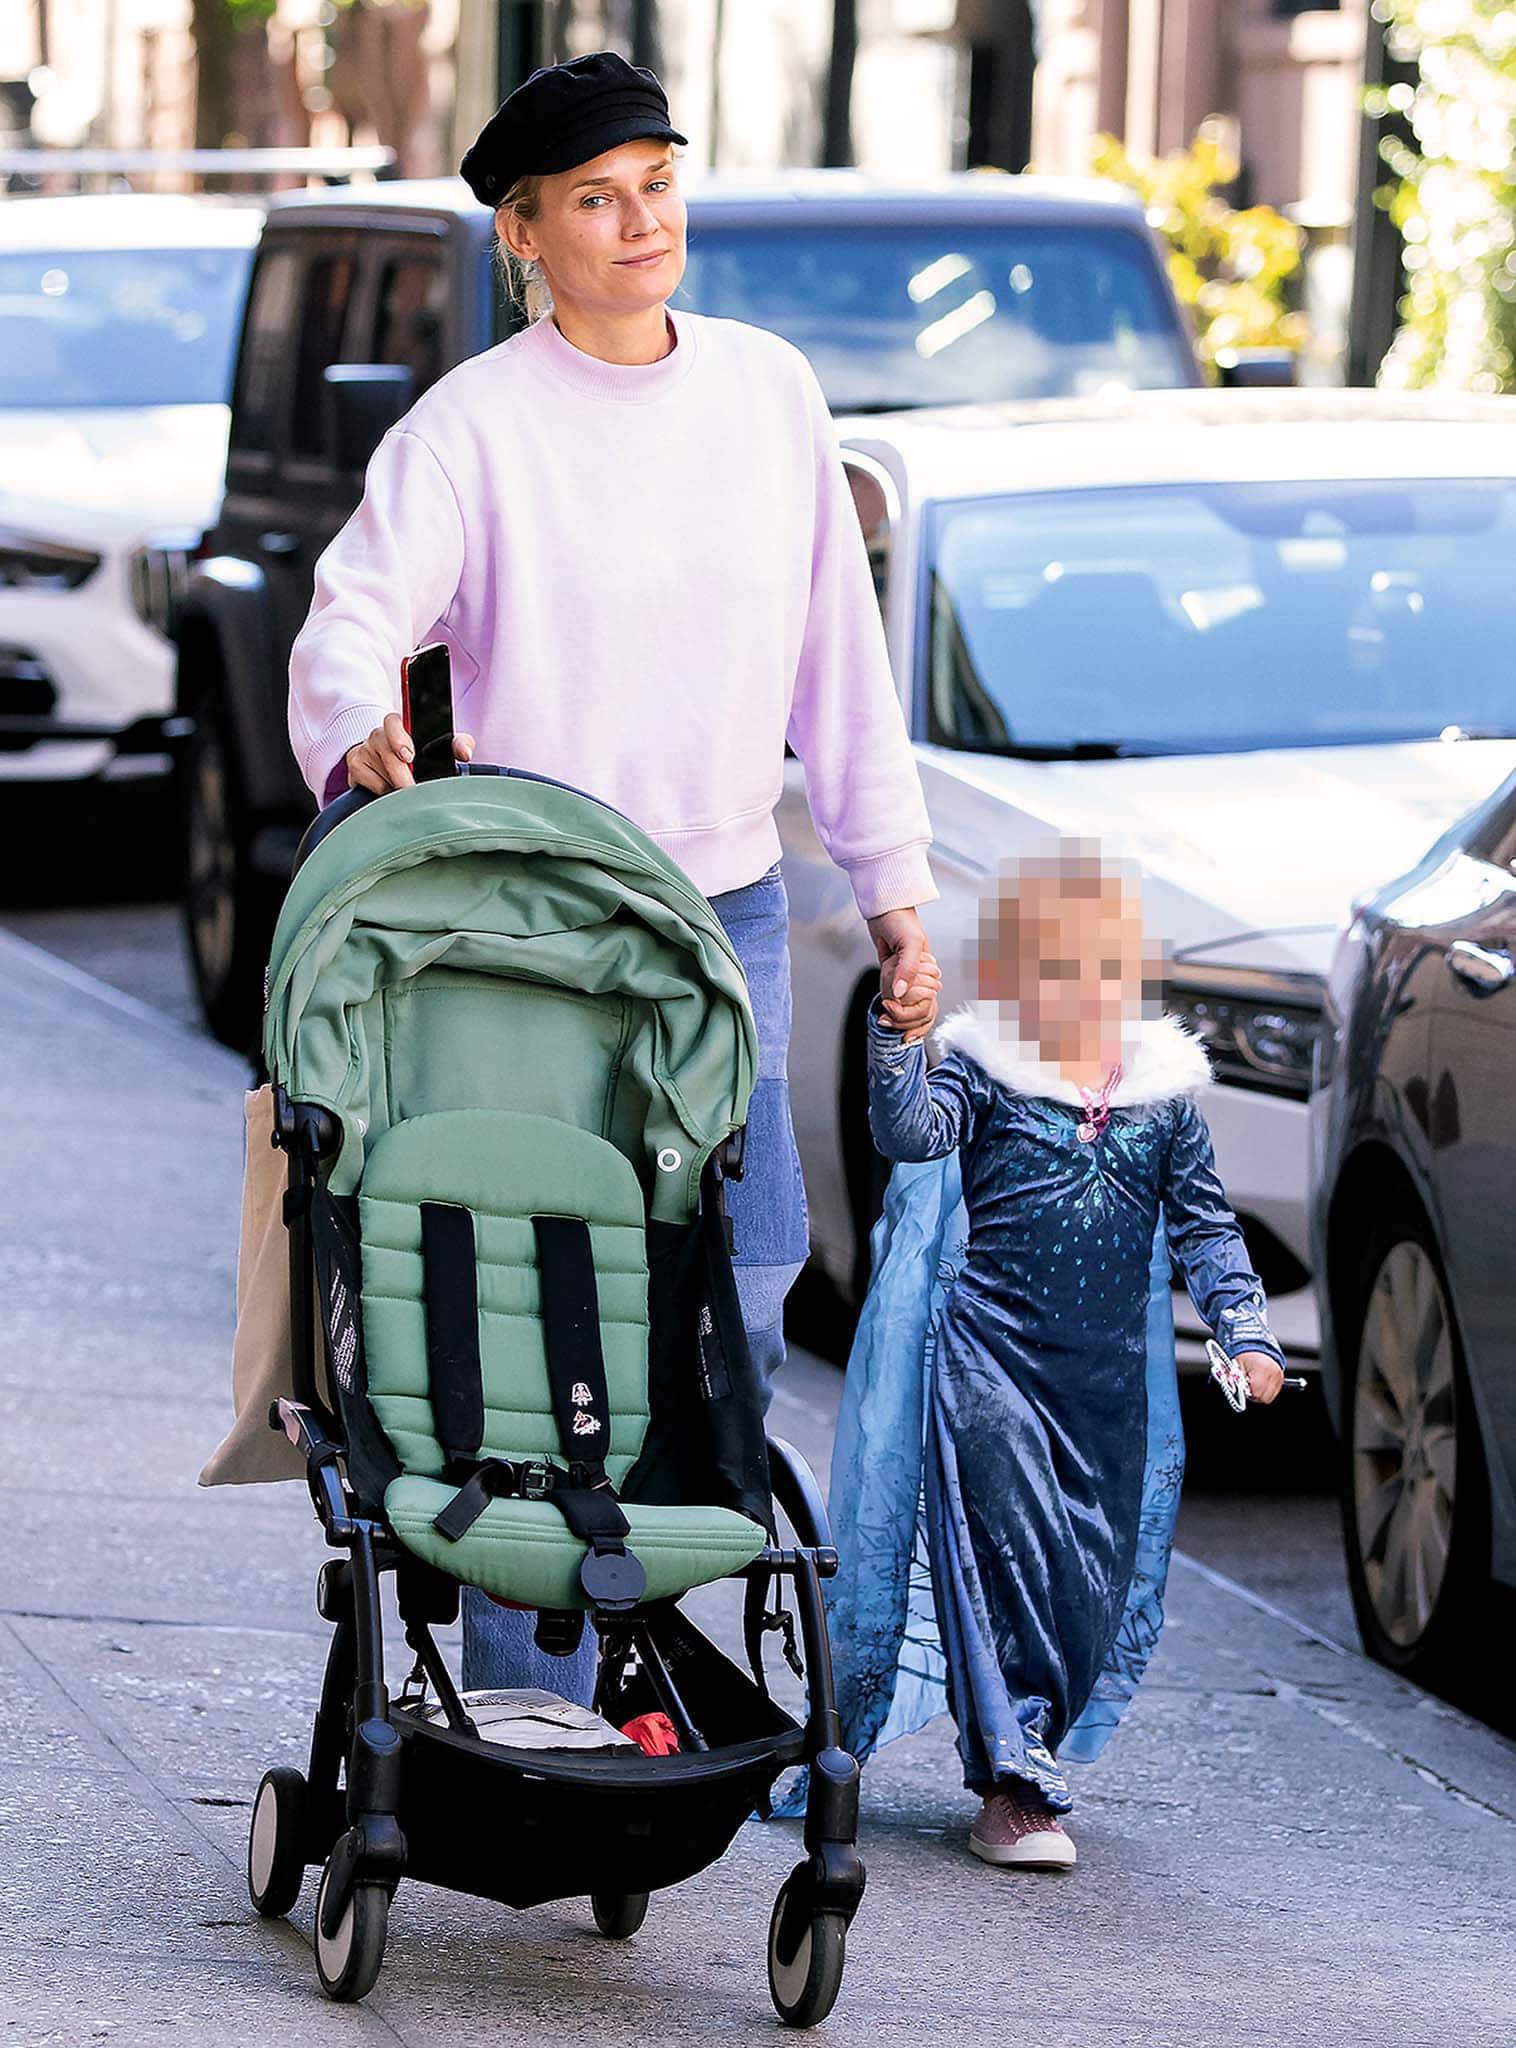 Diane Kruger opts for a casual look as she teams a pastel purple sweater with baggy jeans